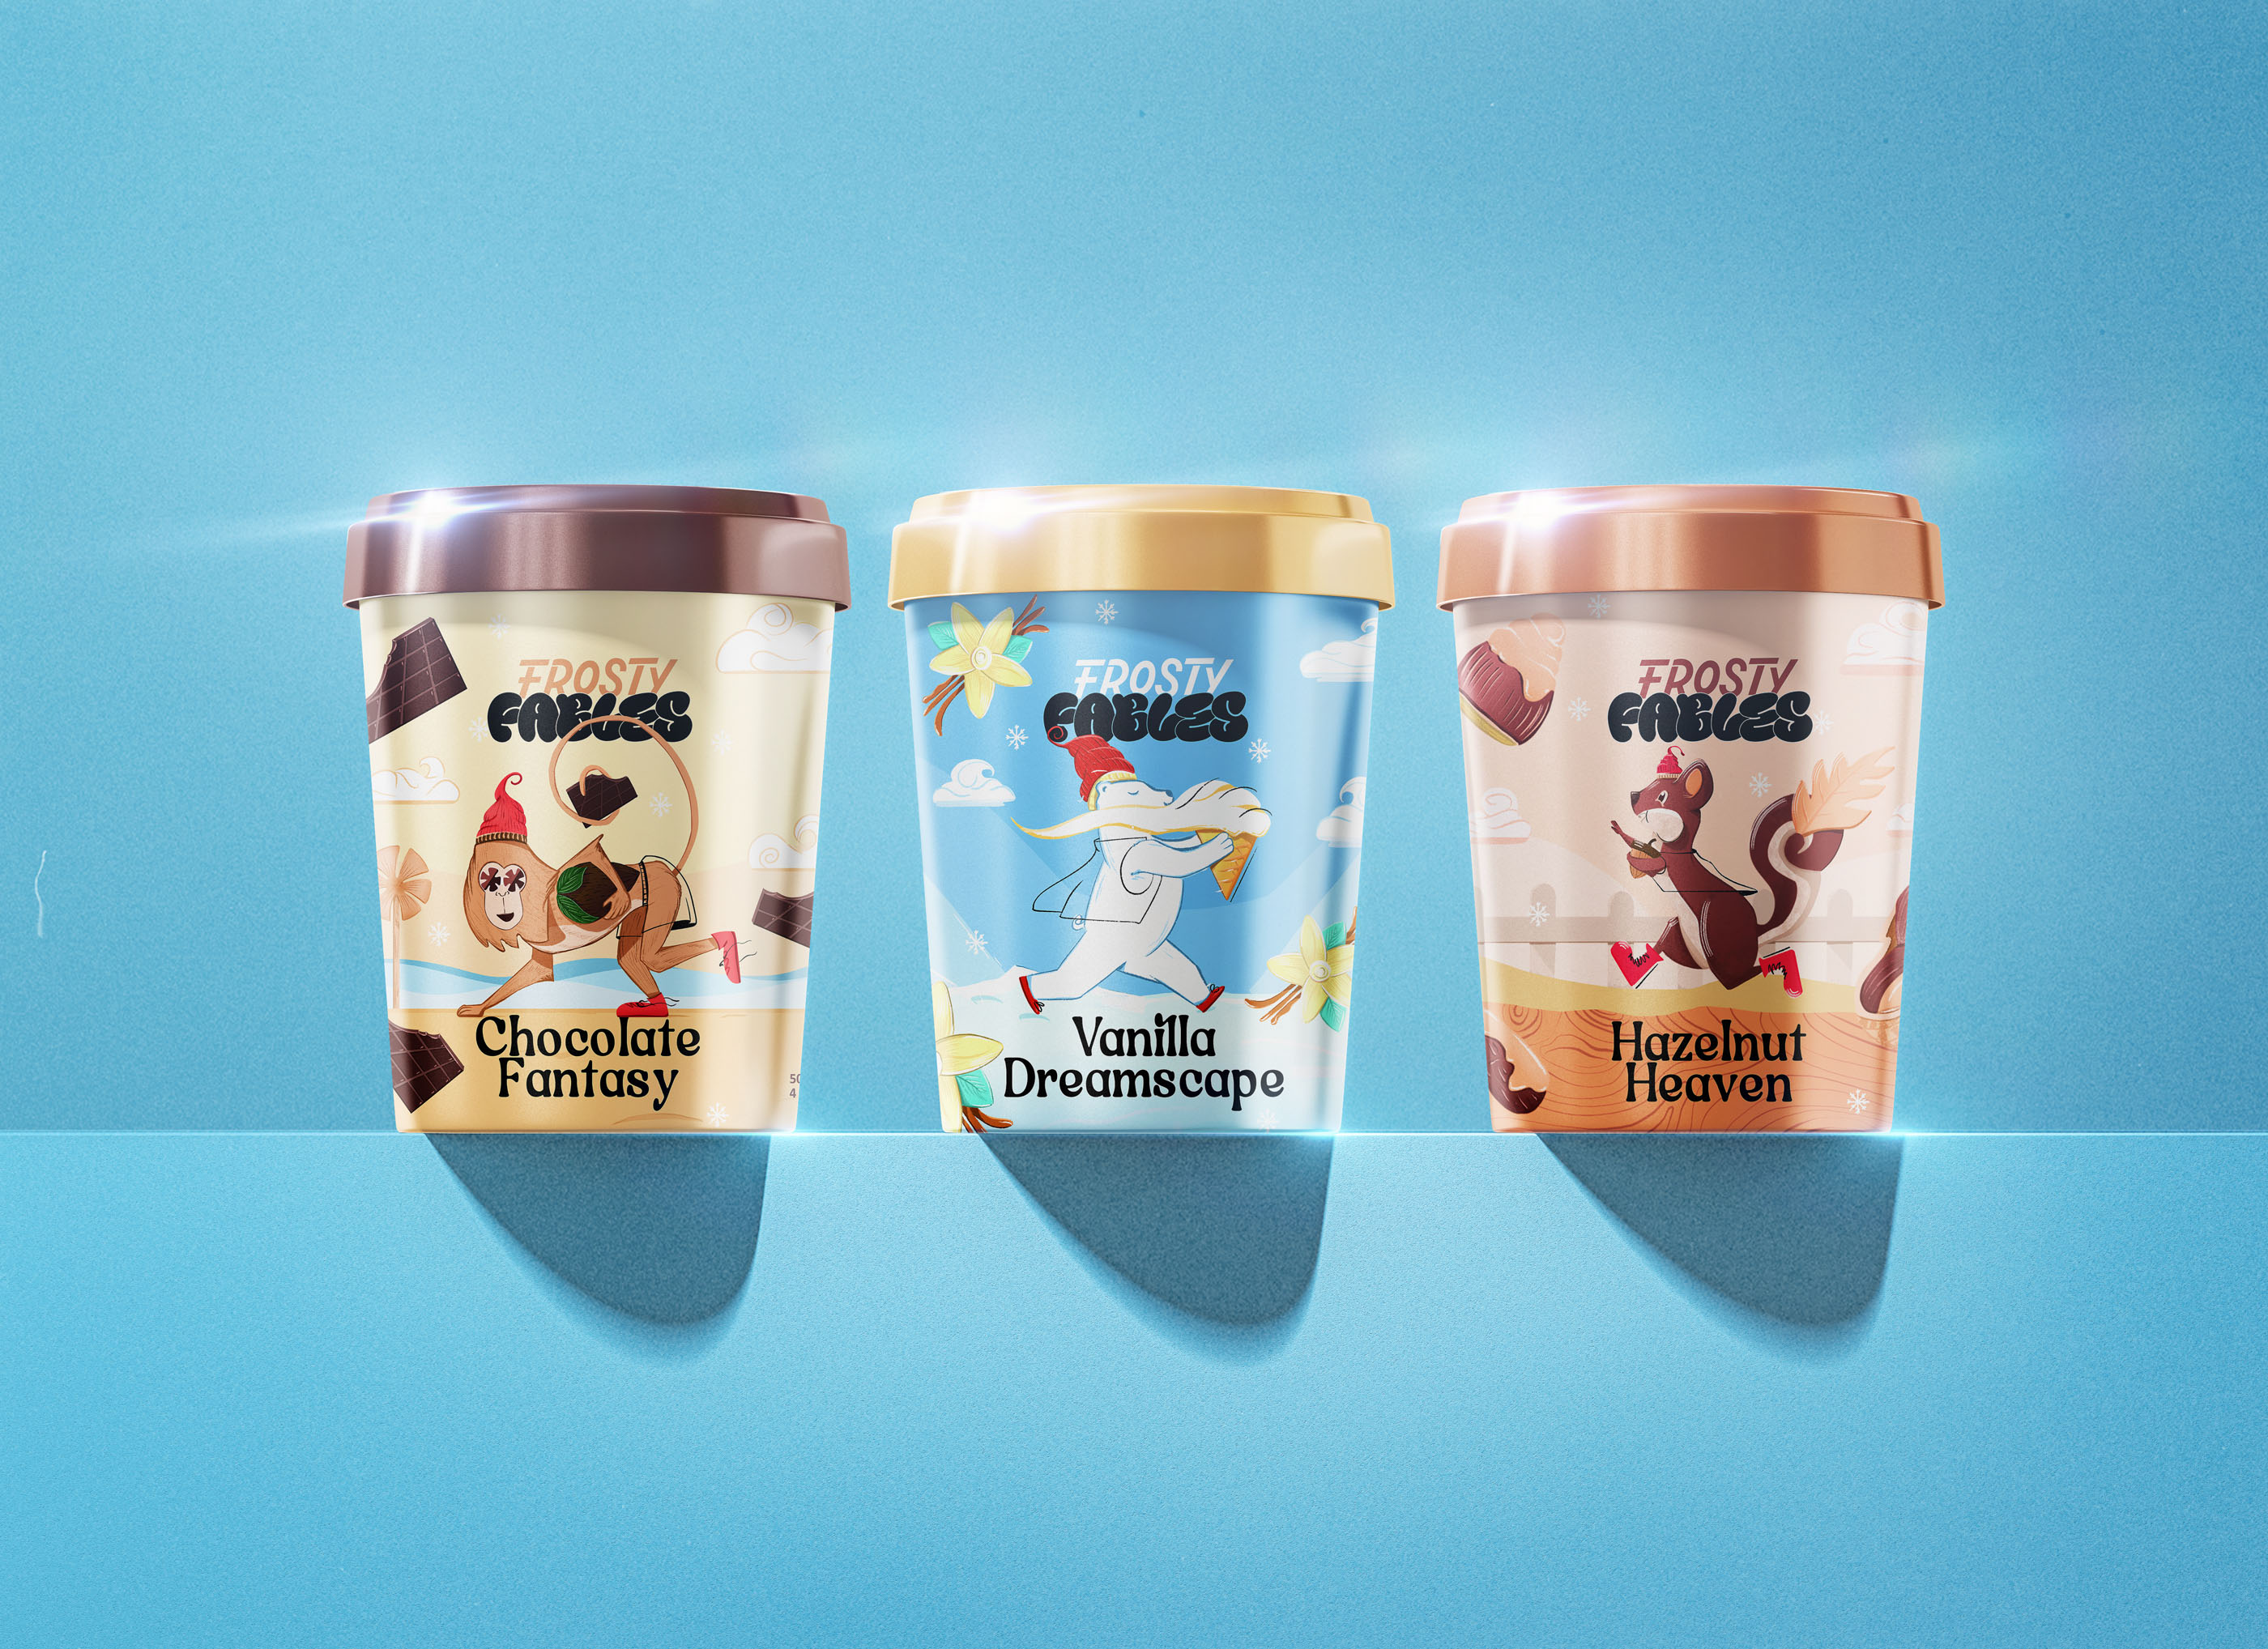 Frosty Fables Ice Cream Packaging Design by Mahmoud Mahroos